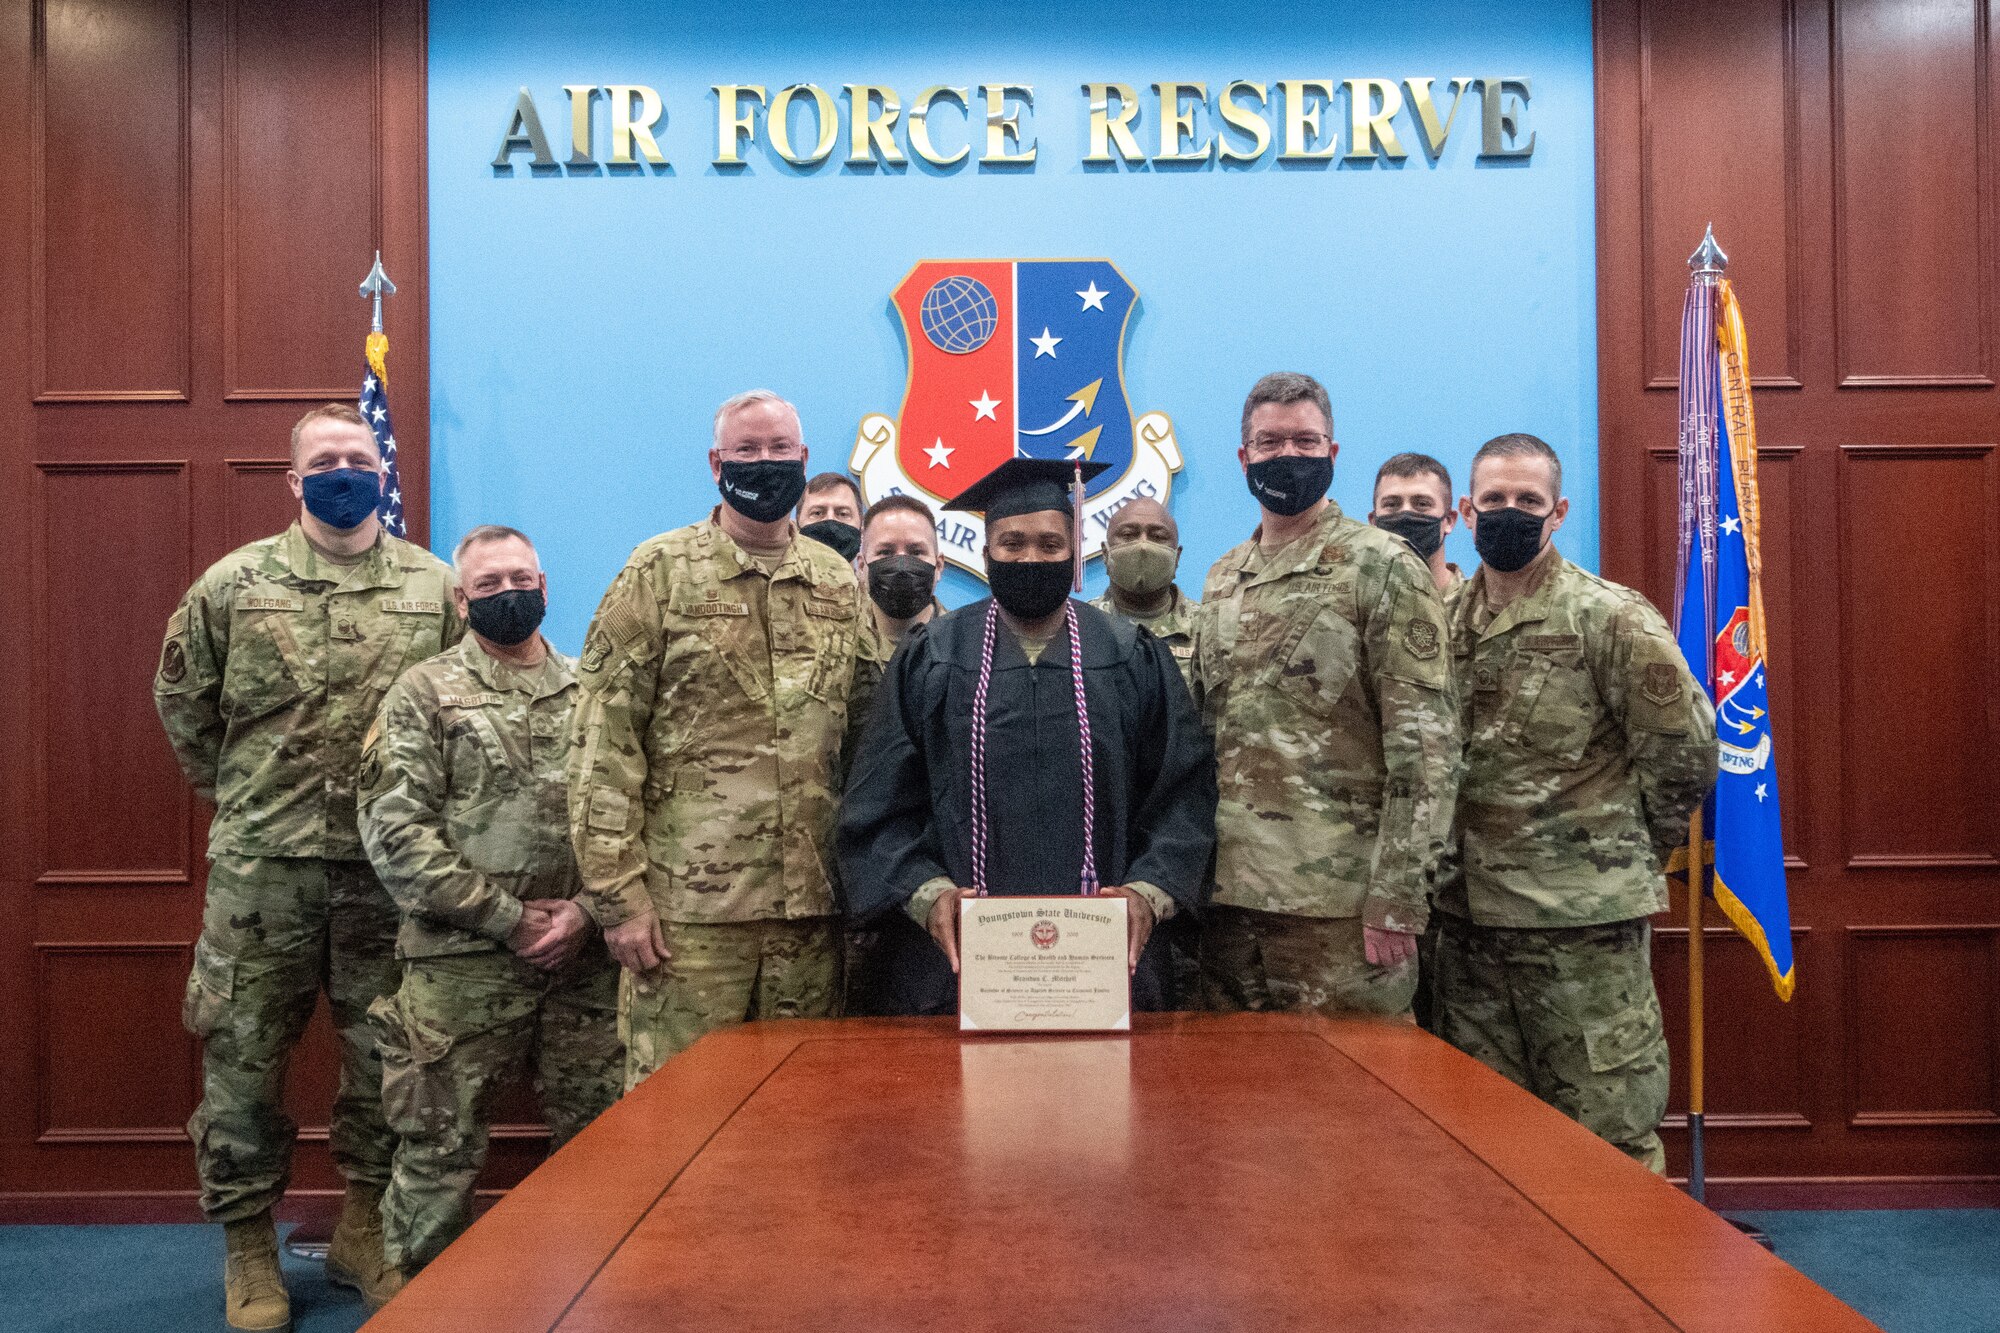 Senior Airman Brandon Mitchell, a passenger services apprentice with the 76th Aerial Port Squadron at Youngstown Air Reserve Station, Ohio, received his diploma from Youngstown State University on time, despite being deployed during the commencement ceremony, via a special delivery by leadership from his home installation and deployed location.